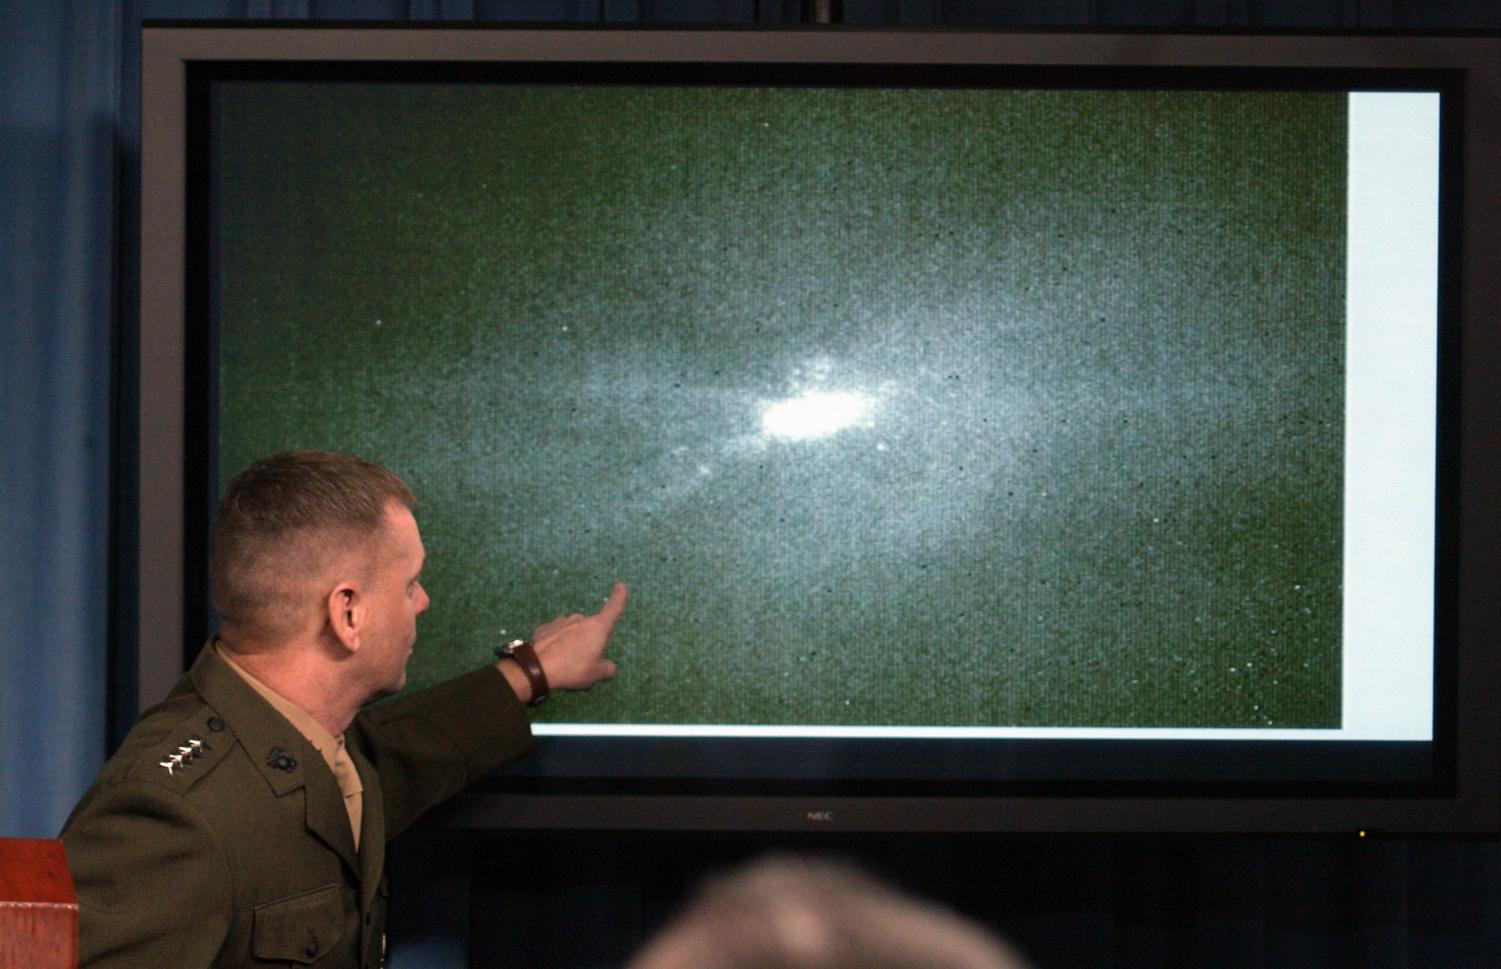 Joint Chiefs Vice Chairman Gen. James Cartwright points to a video during news conference at the Pentagon, Thursday, Feb. 21, 2008, hours after a Navy missile scored a direct hit on the failing spacecraft.